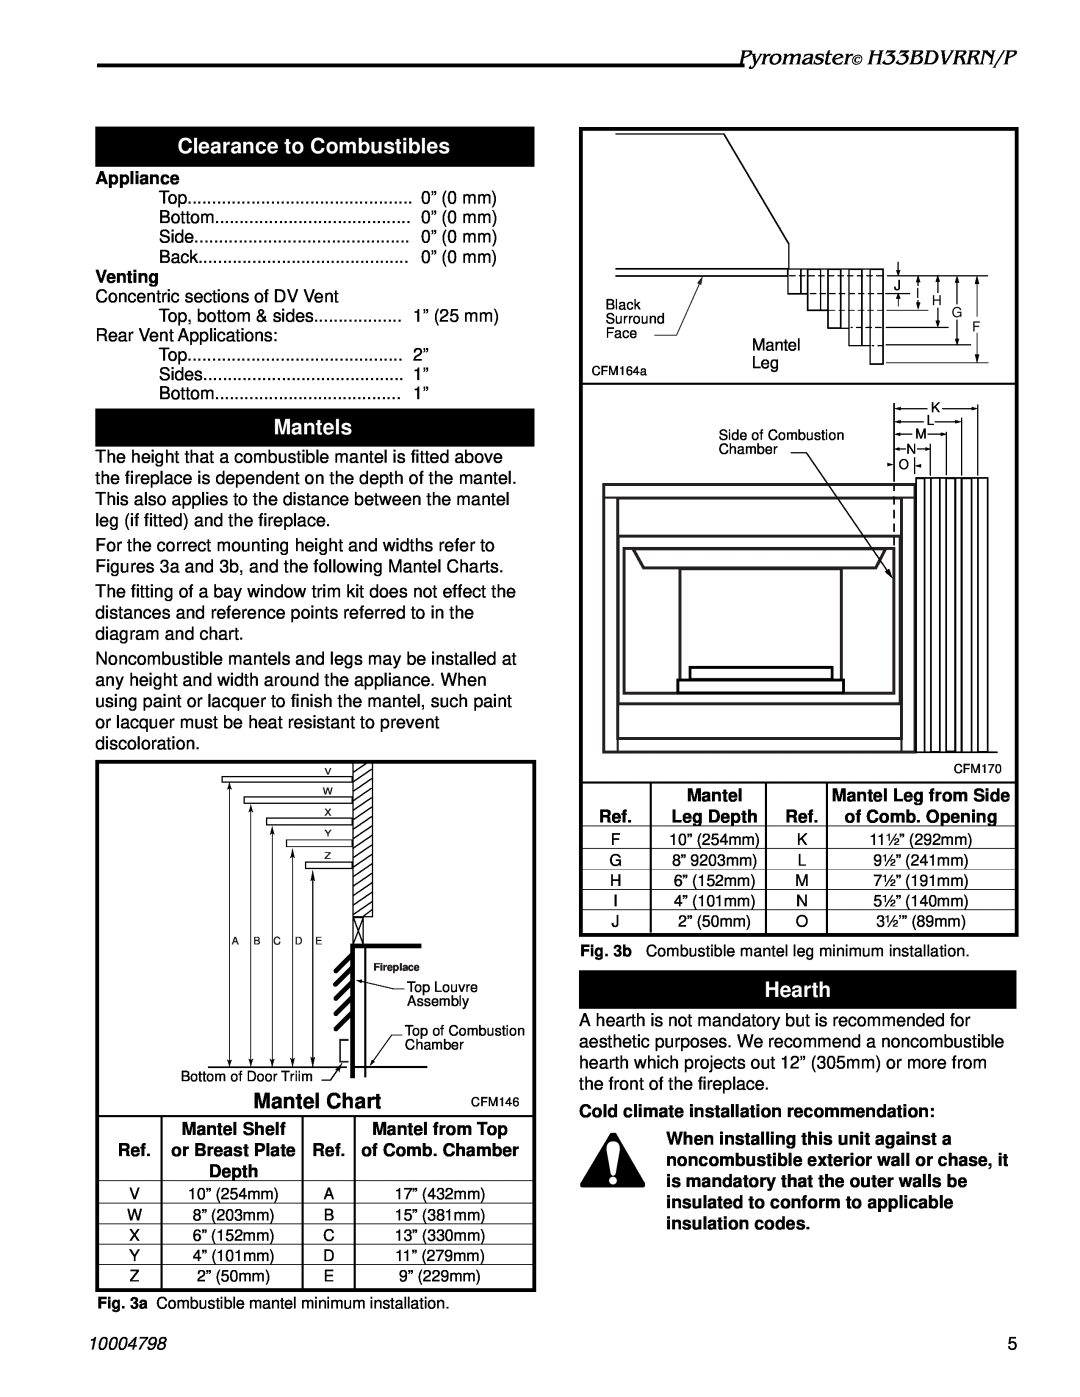 Vermont Casting manual Clearance to Combustibles, Mantels, Hearth, Pyromaster H33BDVRRN/P, Appliance, Venting, Leg Depth 